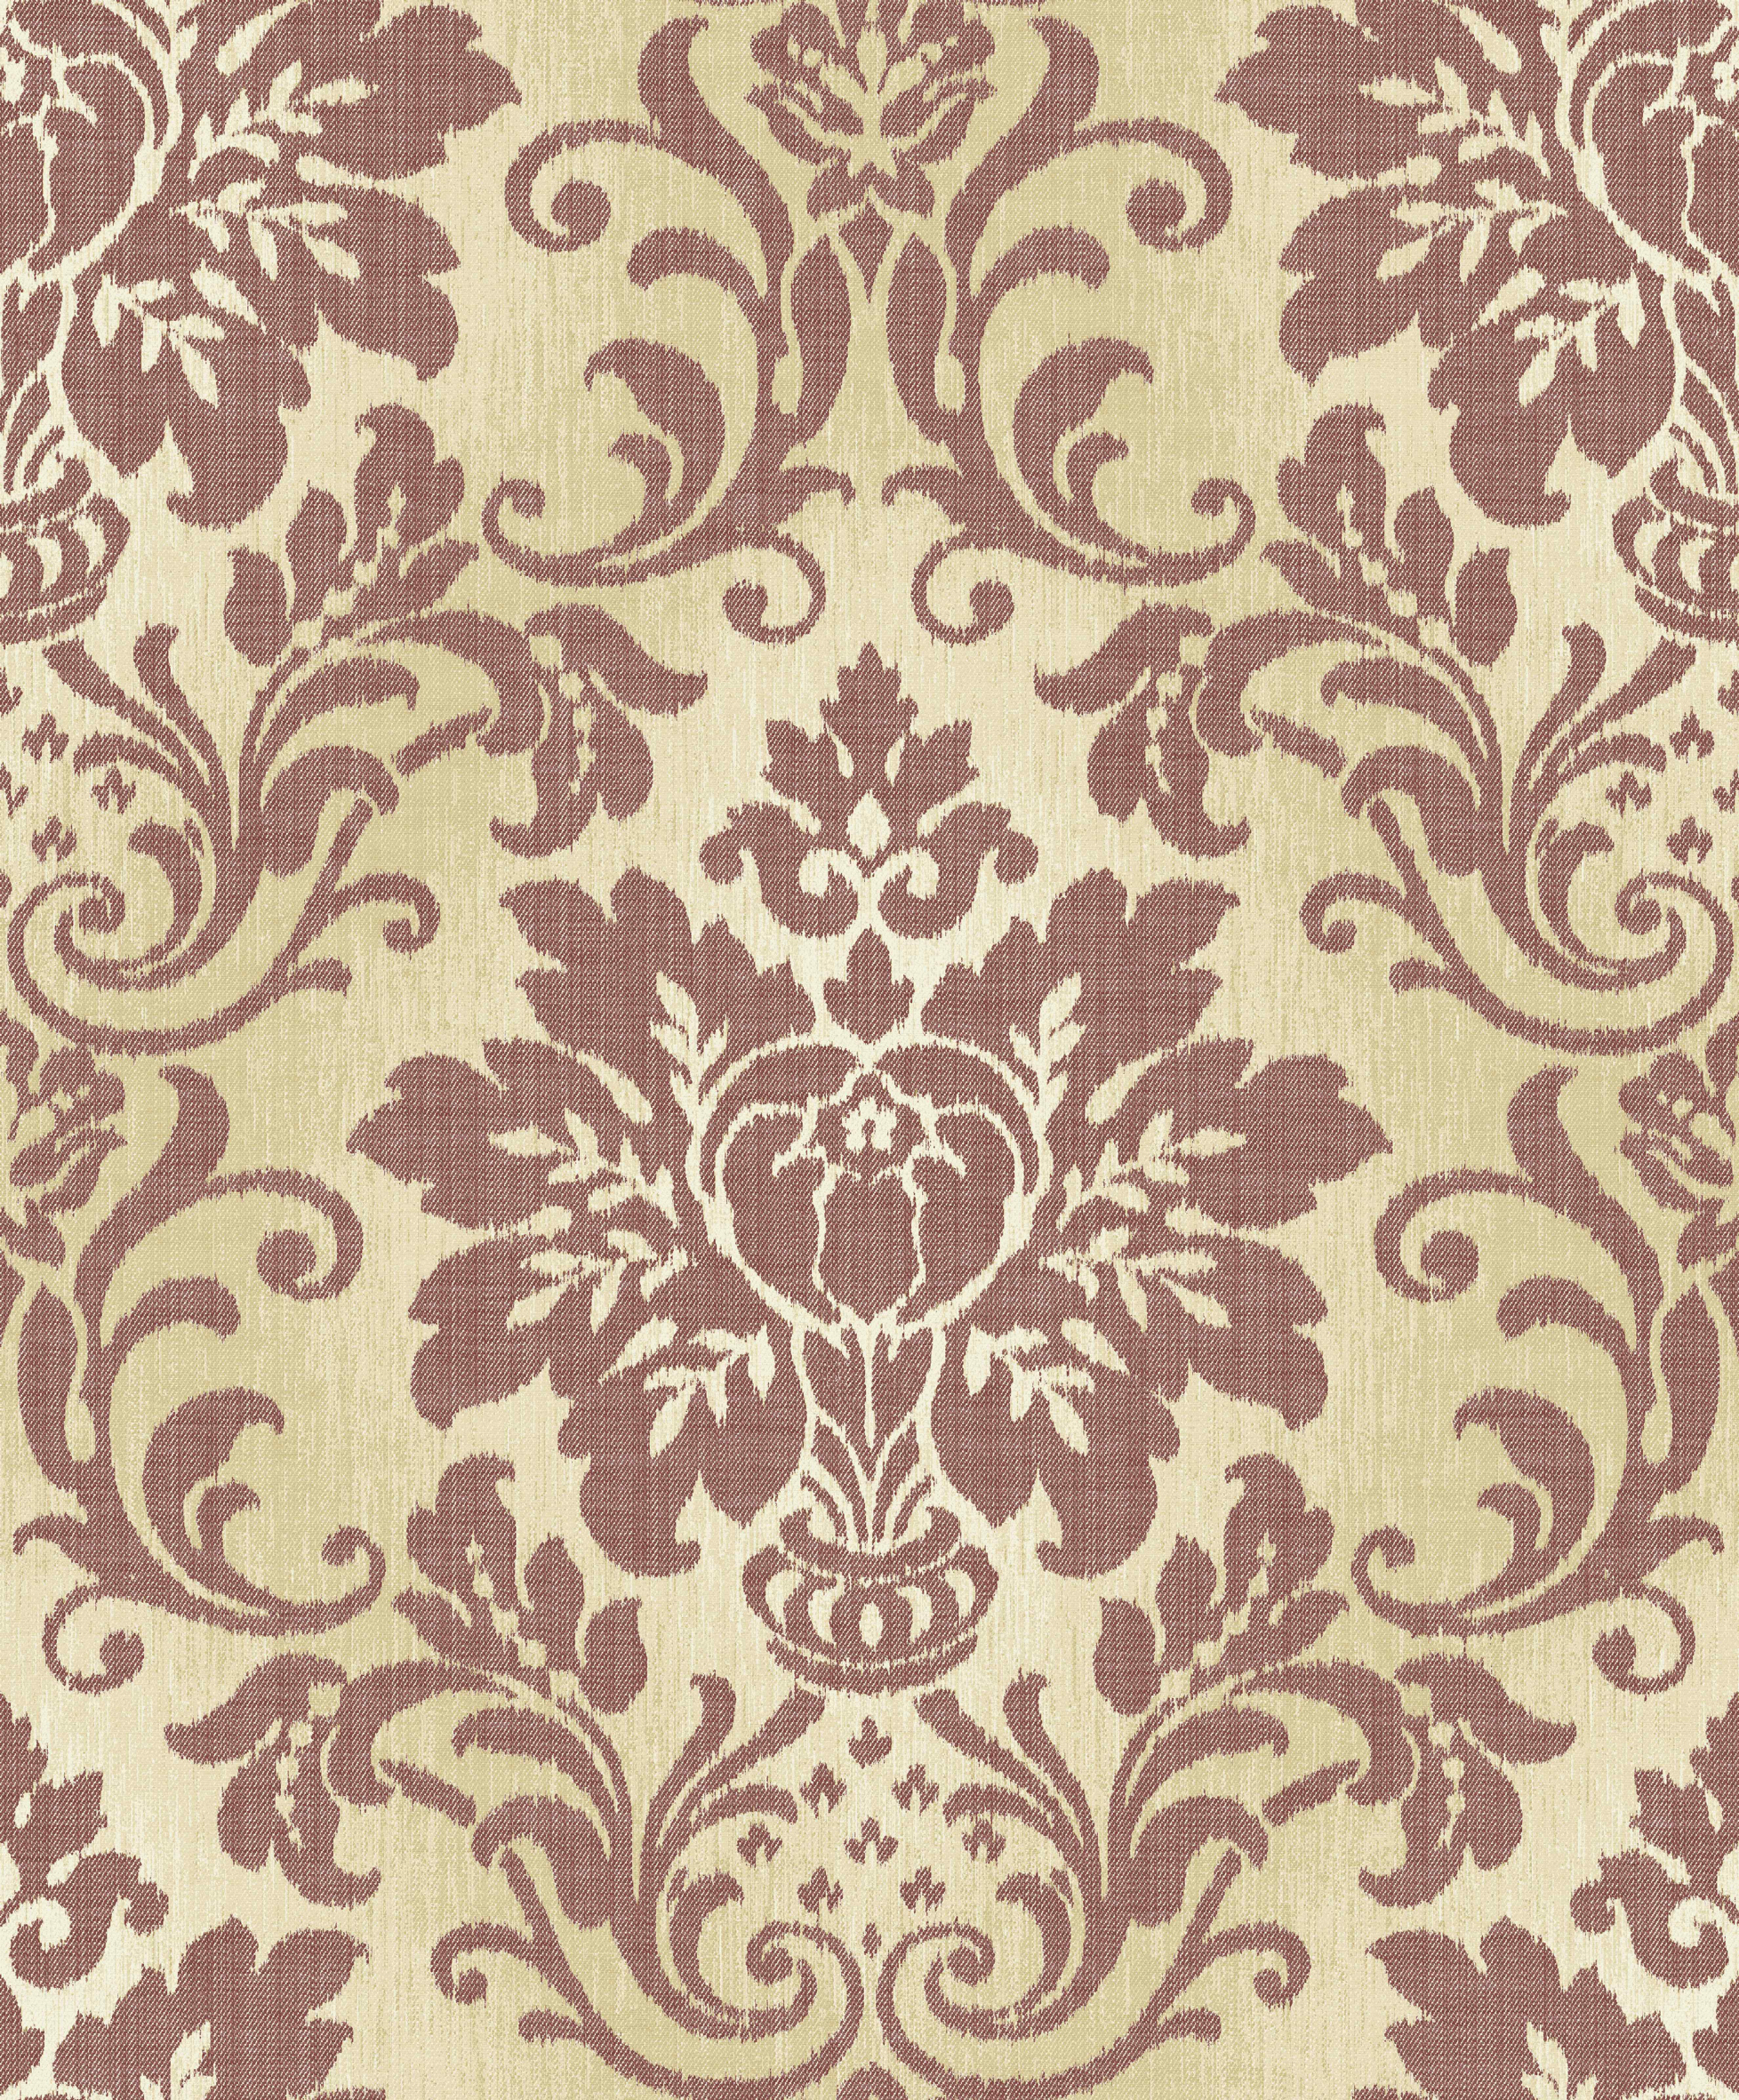 Fabric Damask Vinyl Wallpaper A10901 Red Cut Price